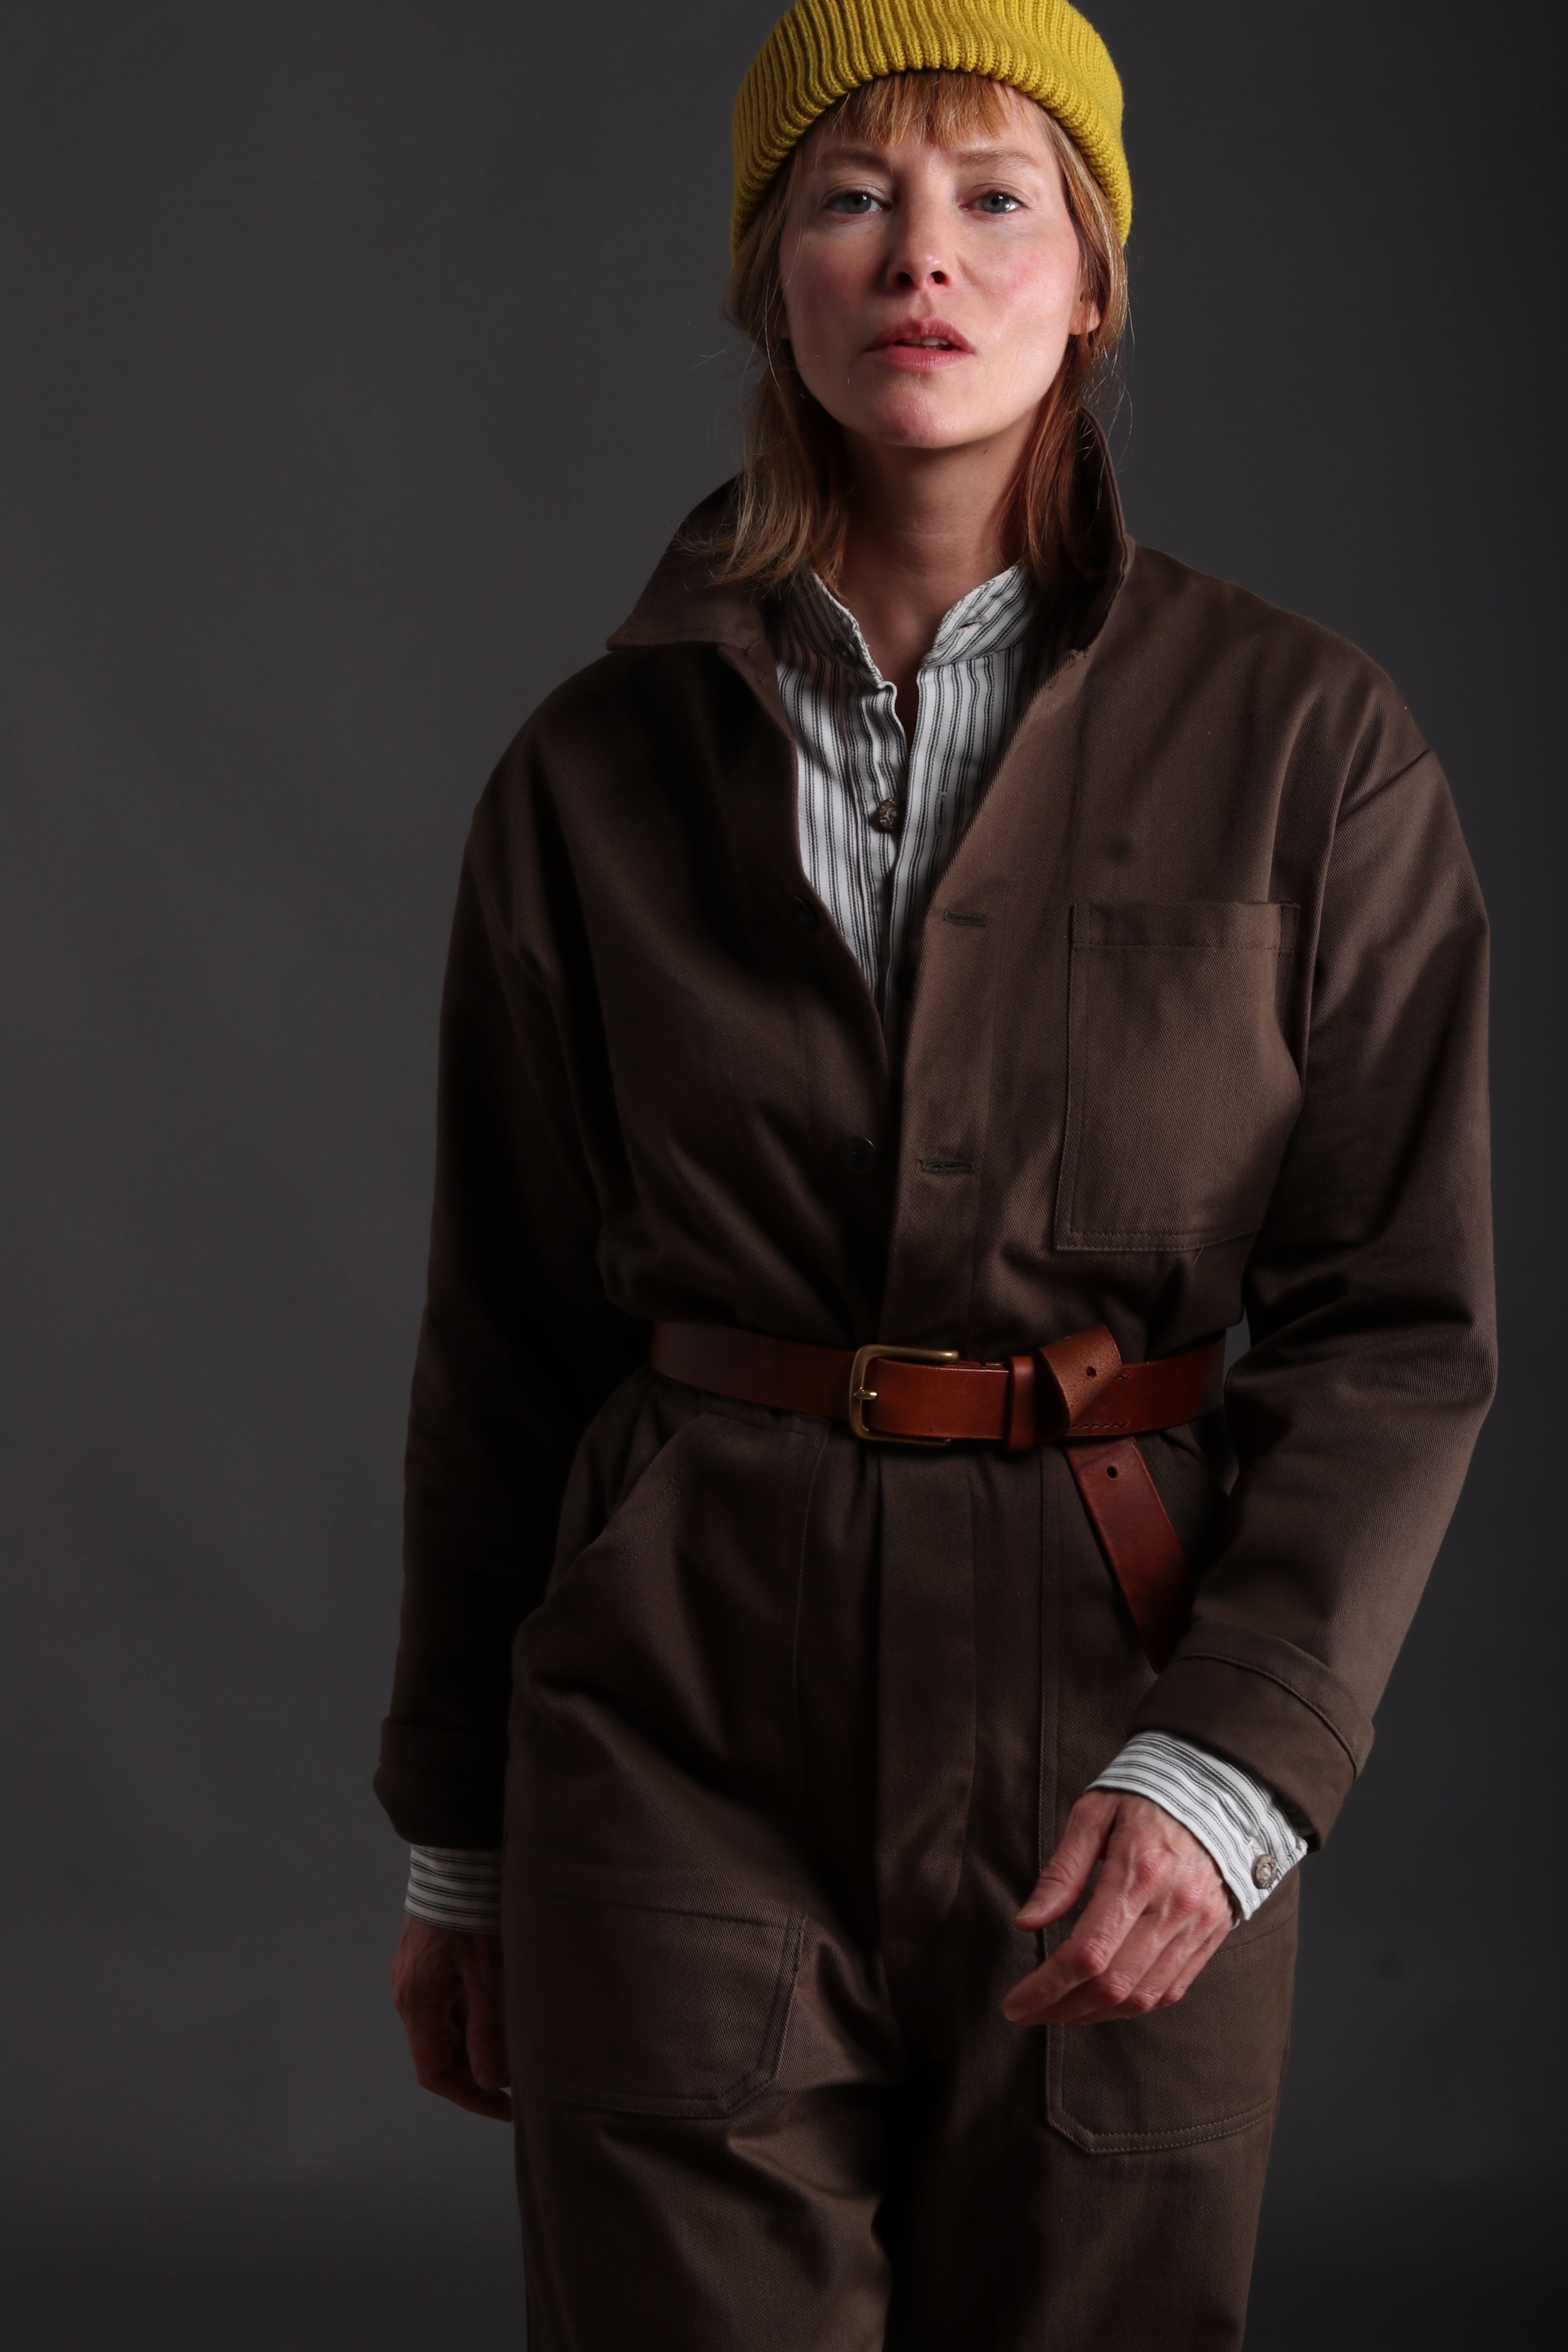 Sienna wears Carrier Company Boiler Suit in Olive Drill with Collarless Work Shirt in Ticking, Wool Hat and Chestnut Leather Belt